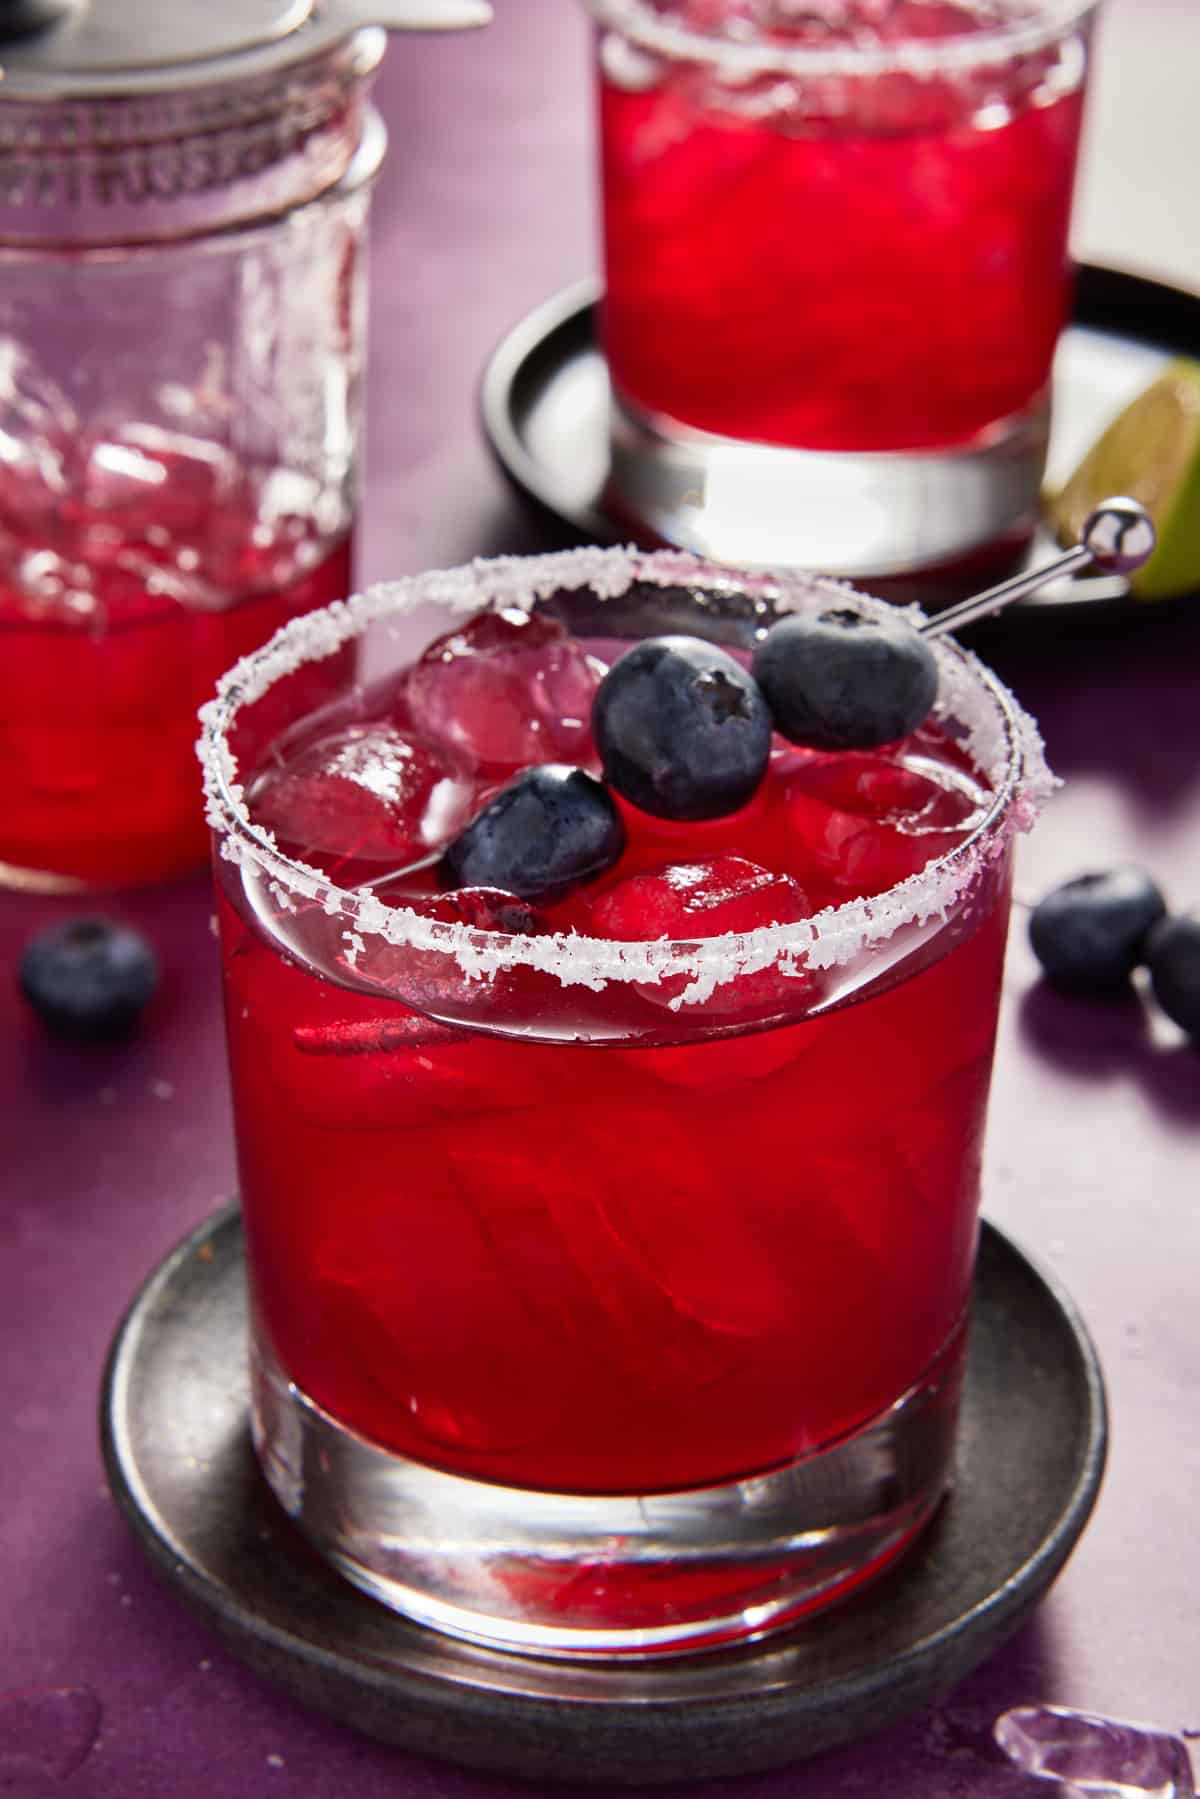 Blueberry Marita in glass with skewered blueberries for garnish.